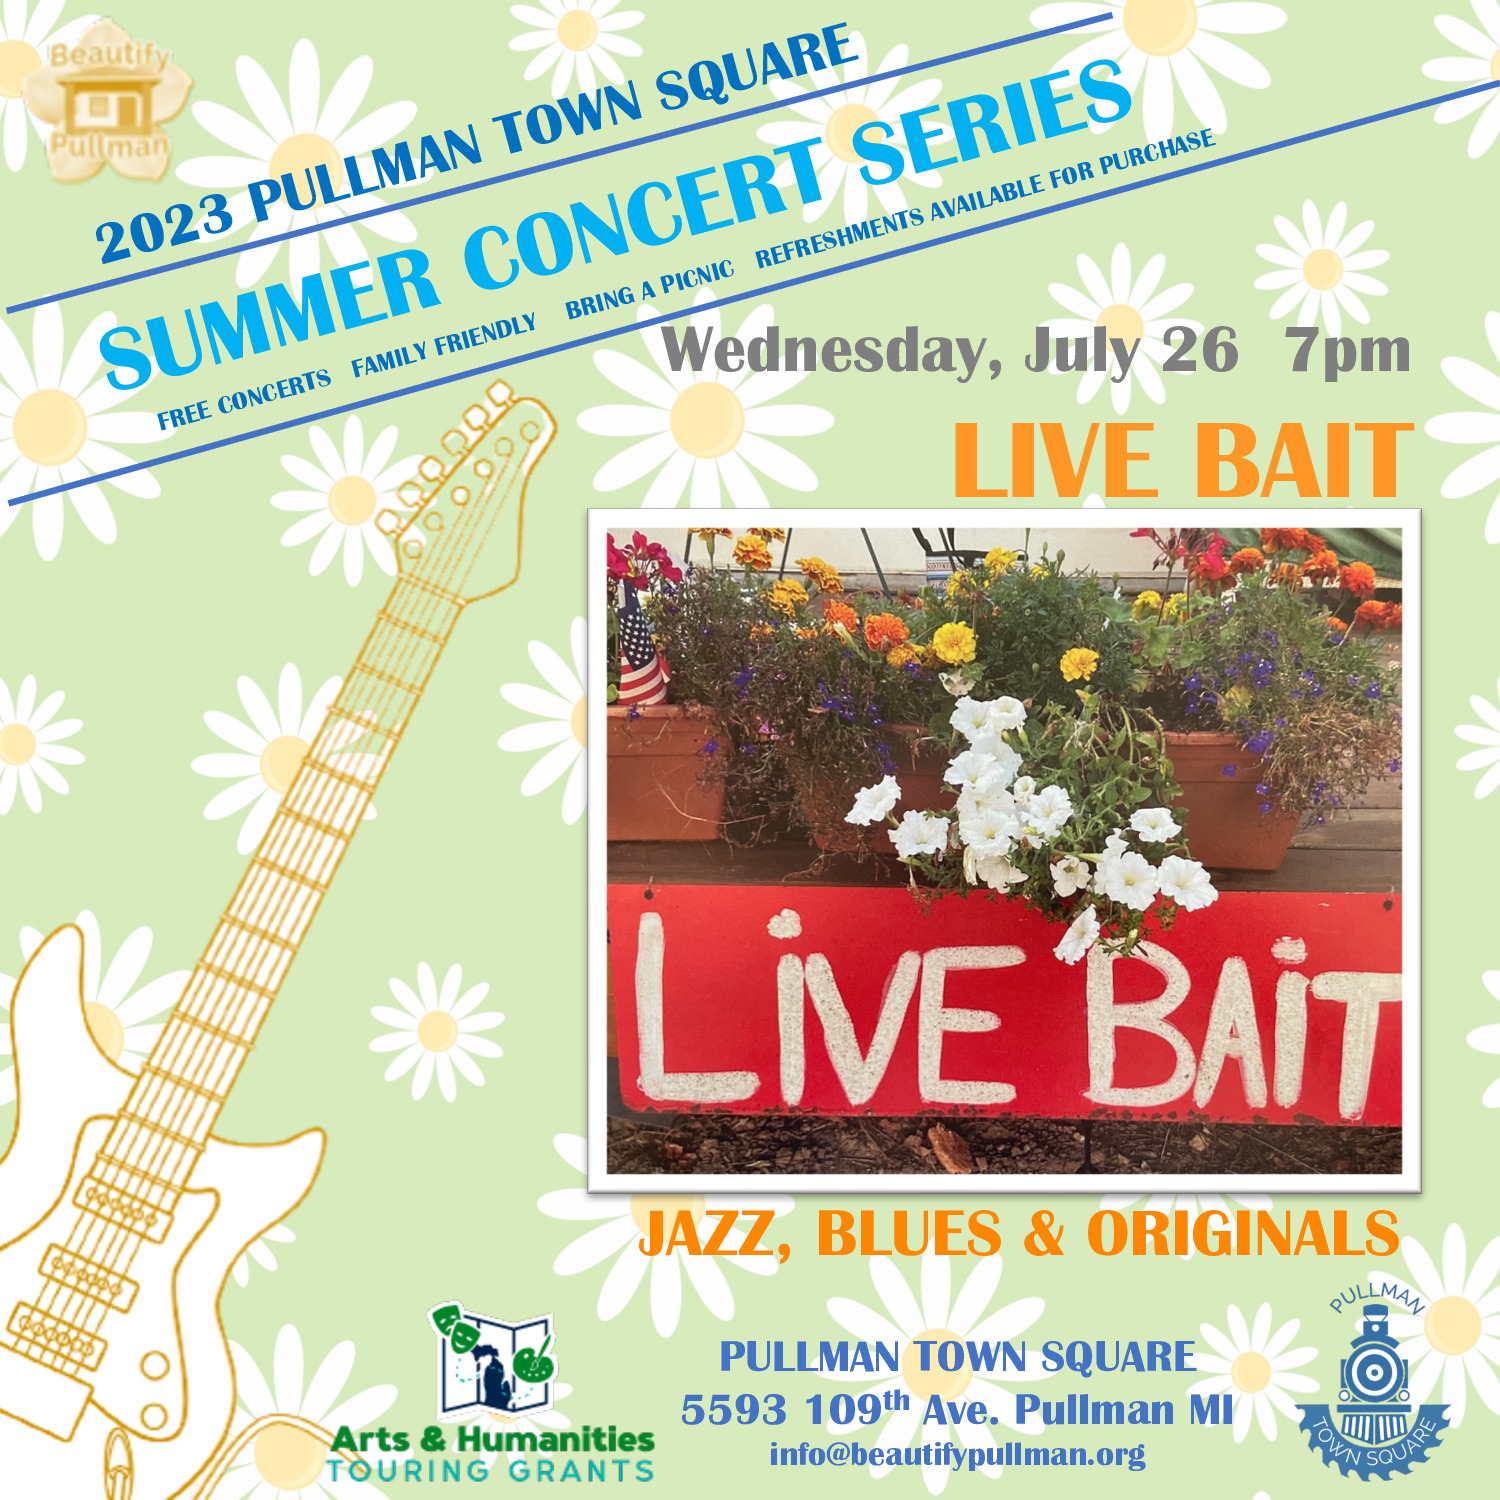 Pullman Square Summer Concert Series Live Bait playing Jazz, Blues